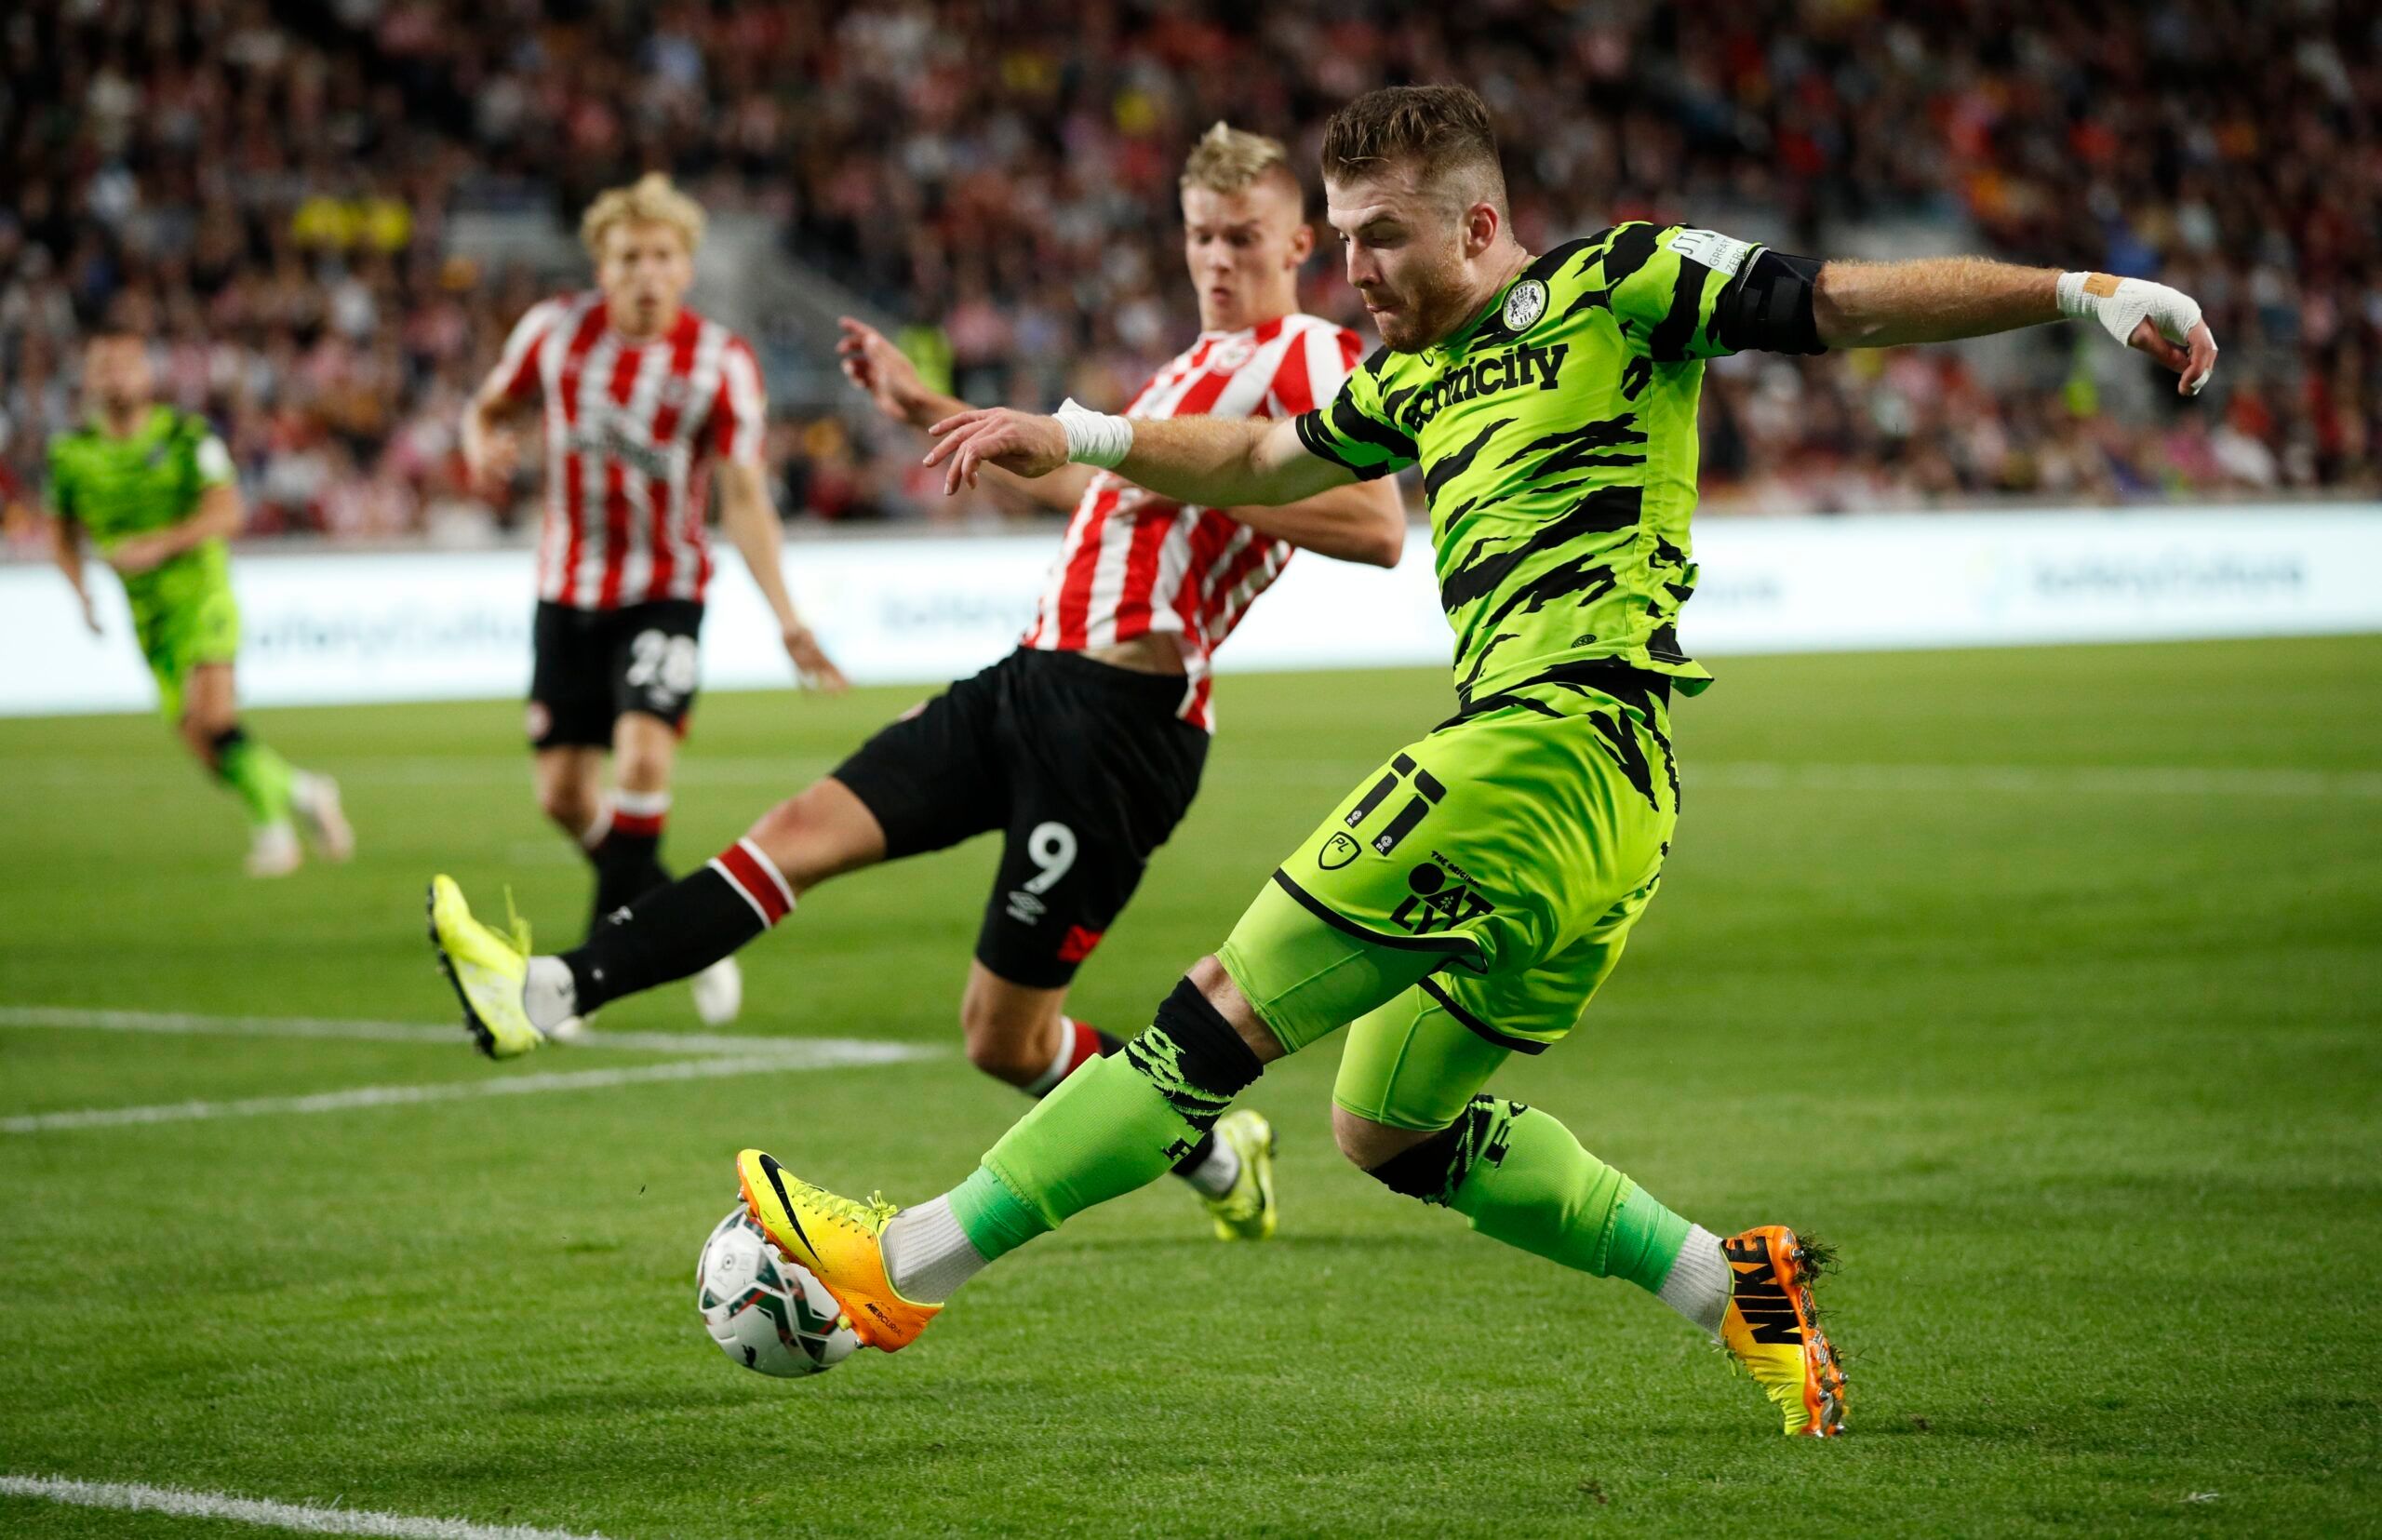 Soccer - England - Carabao Cup Second Round - Brentford v Forest Green Rovers - Community Stadium, London, Britain - August 24, 2021  Forest Green Rovers' Nicky Cadden in action with Brentford's Marcus Forss Action Images via Reuters/John Sibley